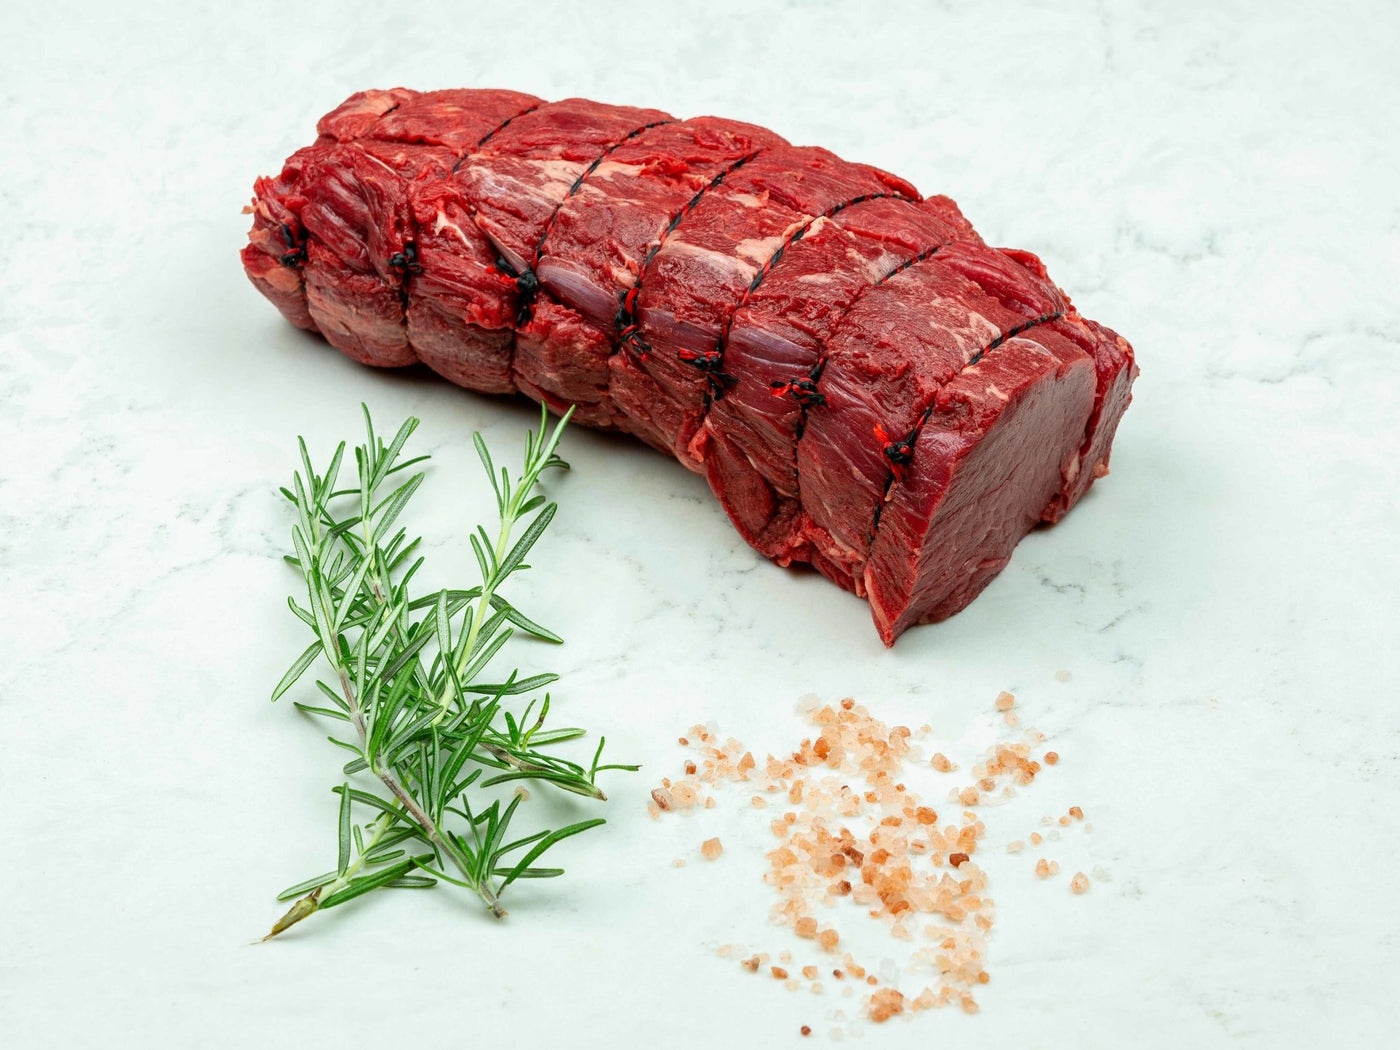 Grass Fed, Dry-Aged Chateaubriand - 1kg - Beef - Thomas Joseph Butchery - Ethical Dry-Aged Meat The Best Steak UK Thomas Joseph Butchery